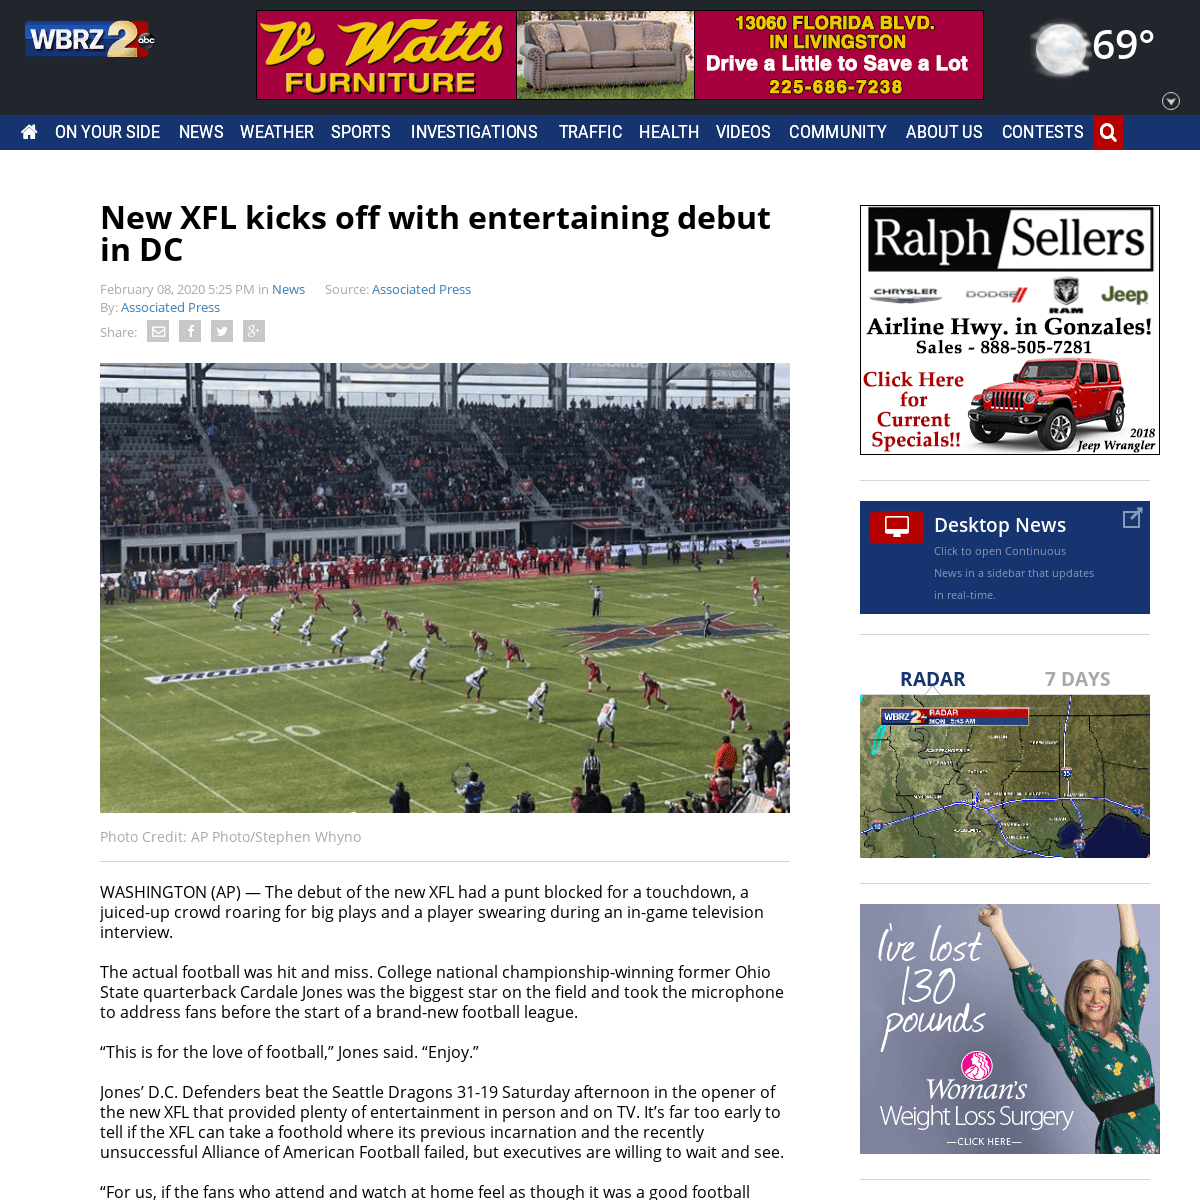 A complete backup of www.wbrz.com/news/new-xfl-kicks-off-with-entertaining-debut-in-dc/